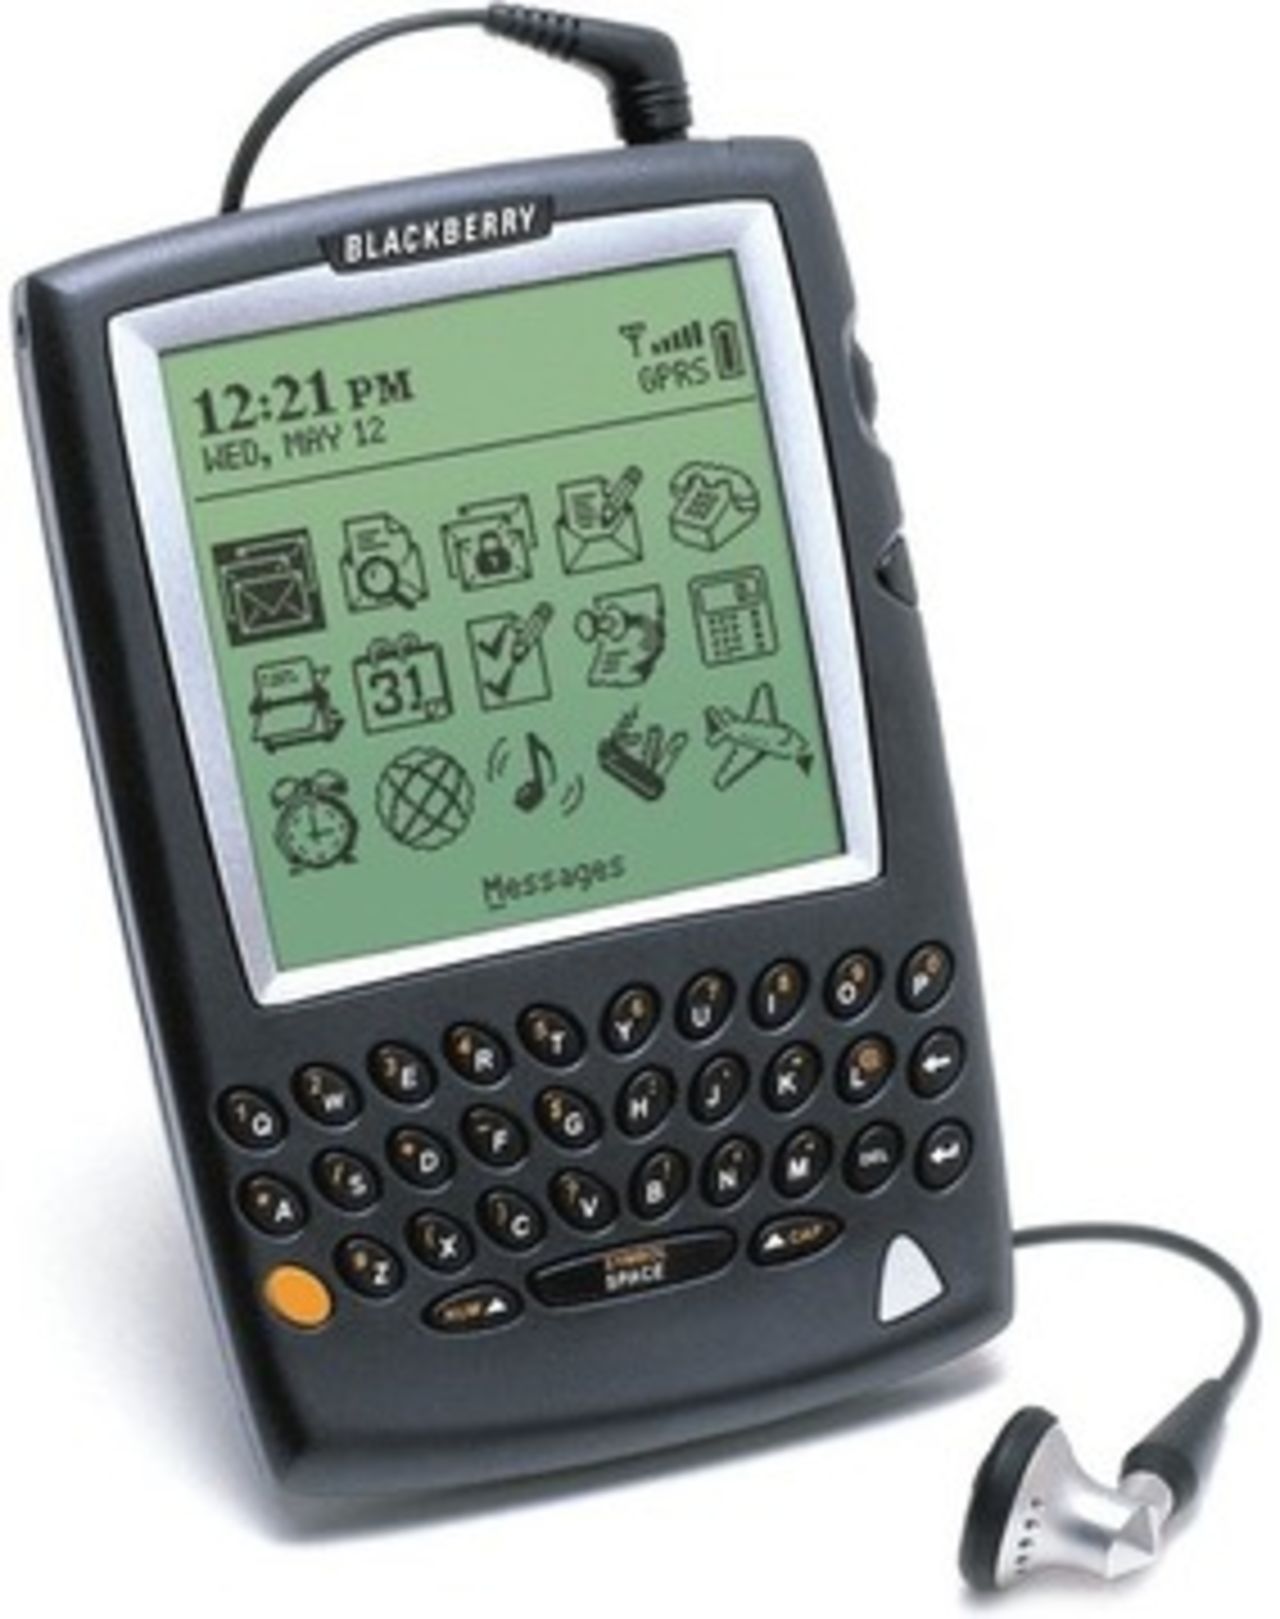 It wasn't until 2002 that the BlackBerry was actually a phone.  That's right, the 5810 was the first model that allowed you to make calls. It came with a caveat: no built-in microphone or speaker meant you had to plug in a headset to use the feature.